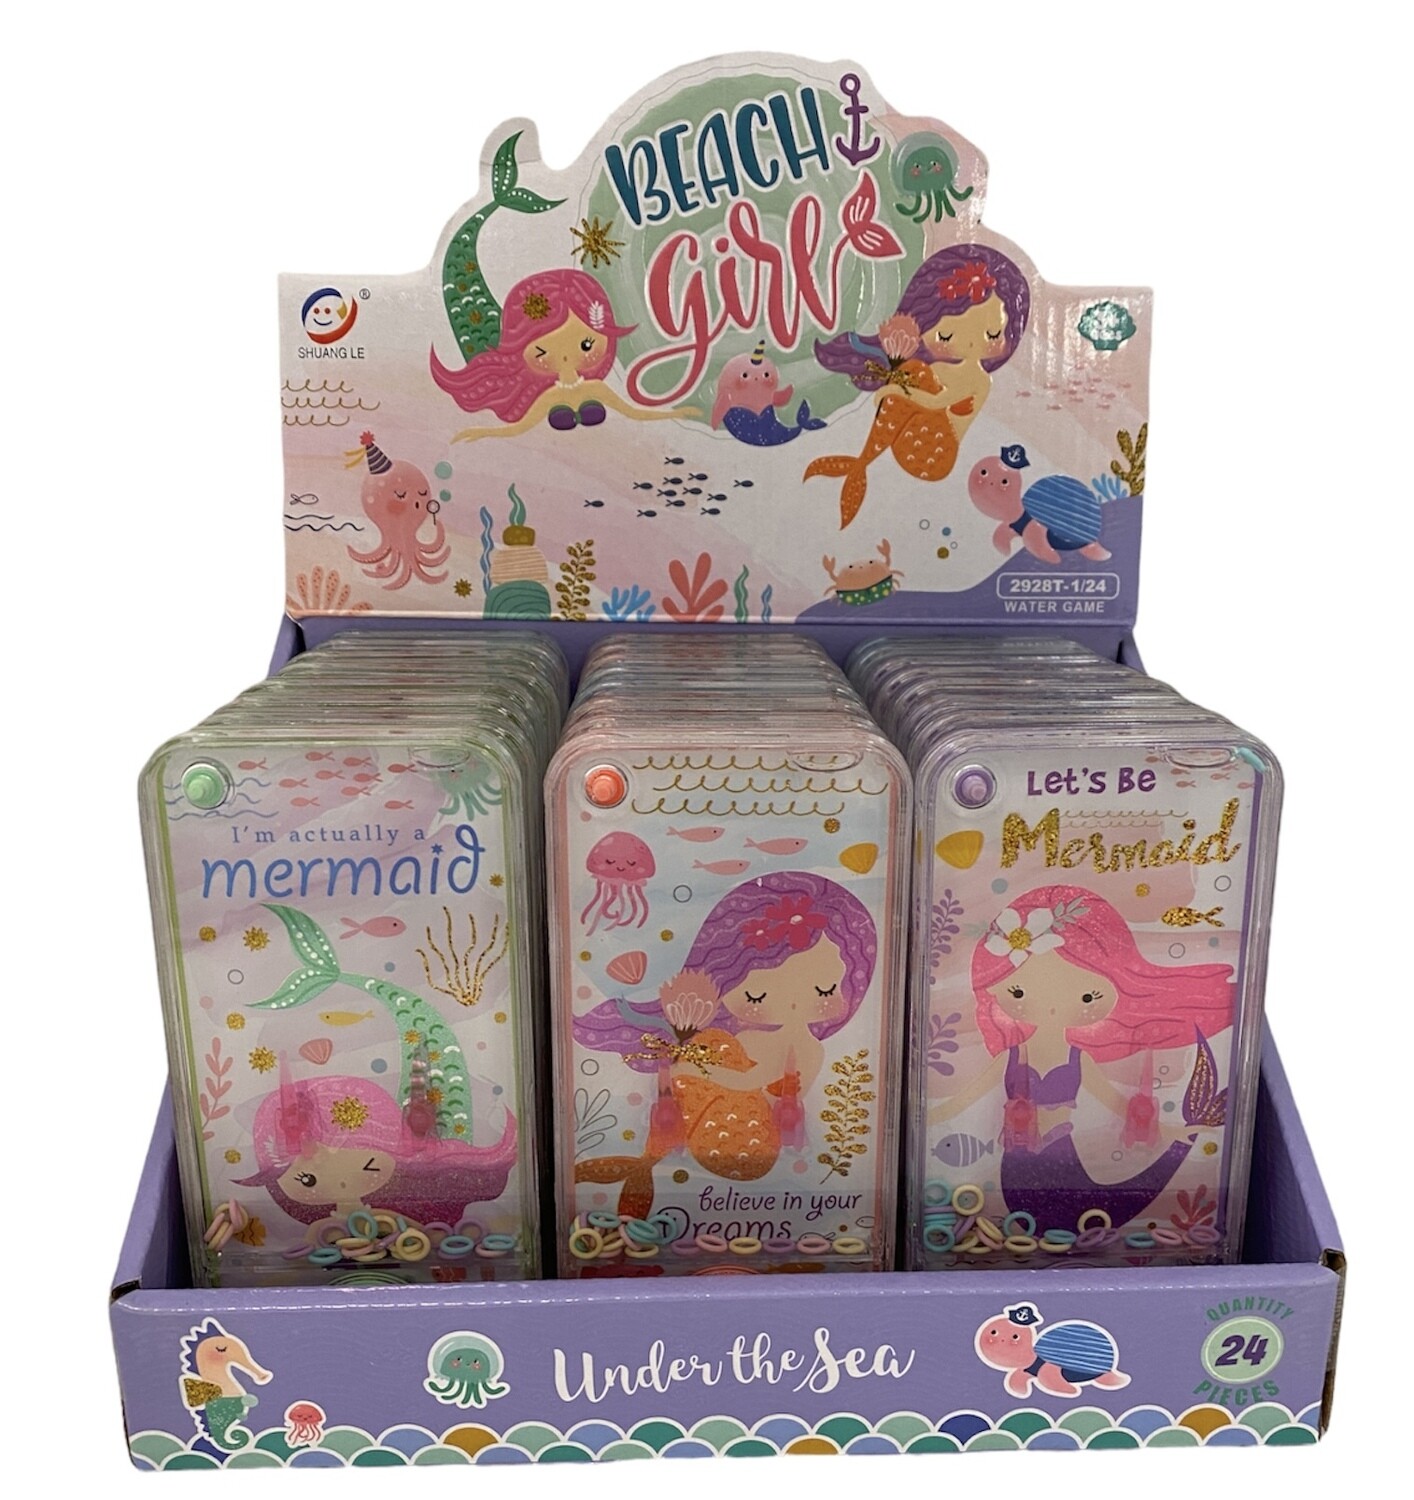 $2.99 NOVELTY MIX / MERMAID TRANSPARENT WATER GAME / 1748-P-7553